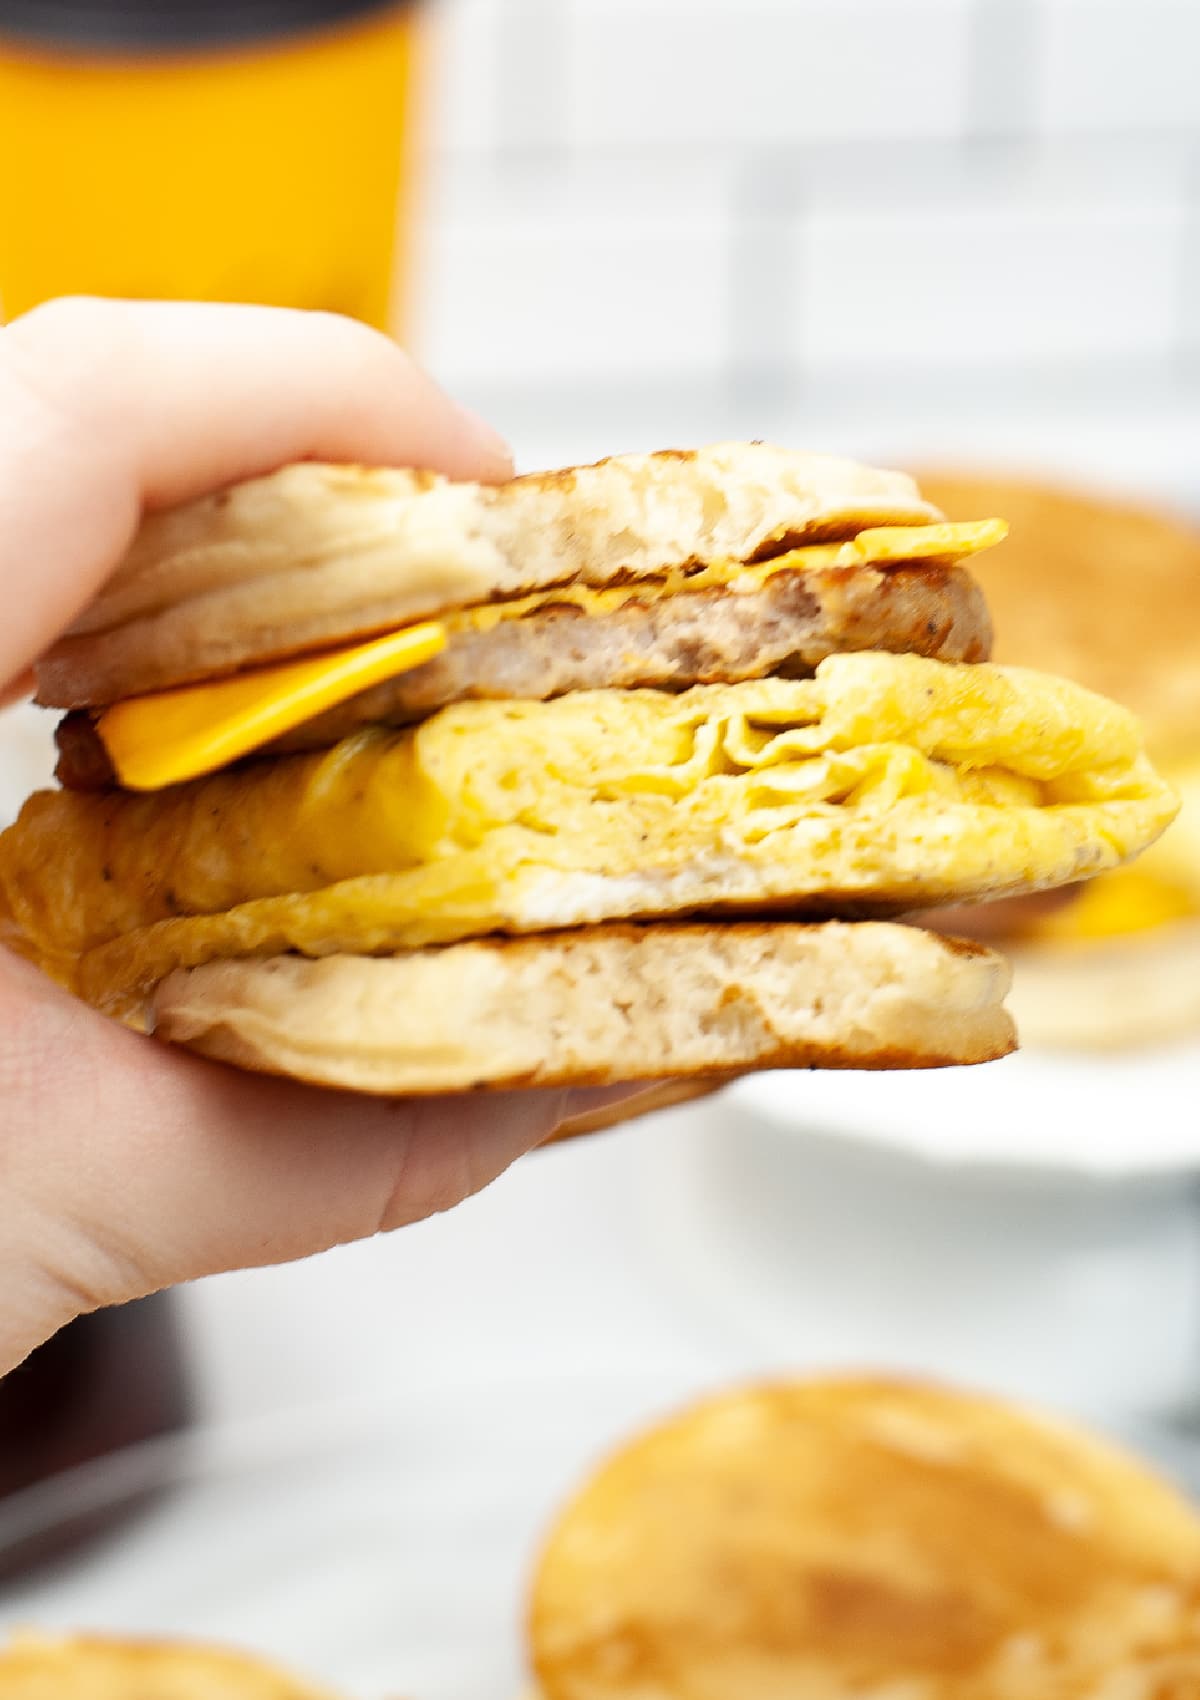 Homemade McGriddle Recipe with a bite taken out (McDonald's Copycat)